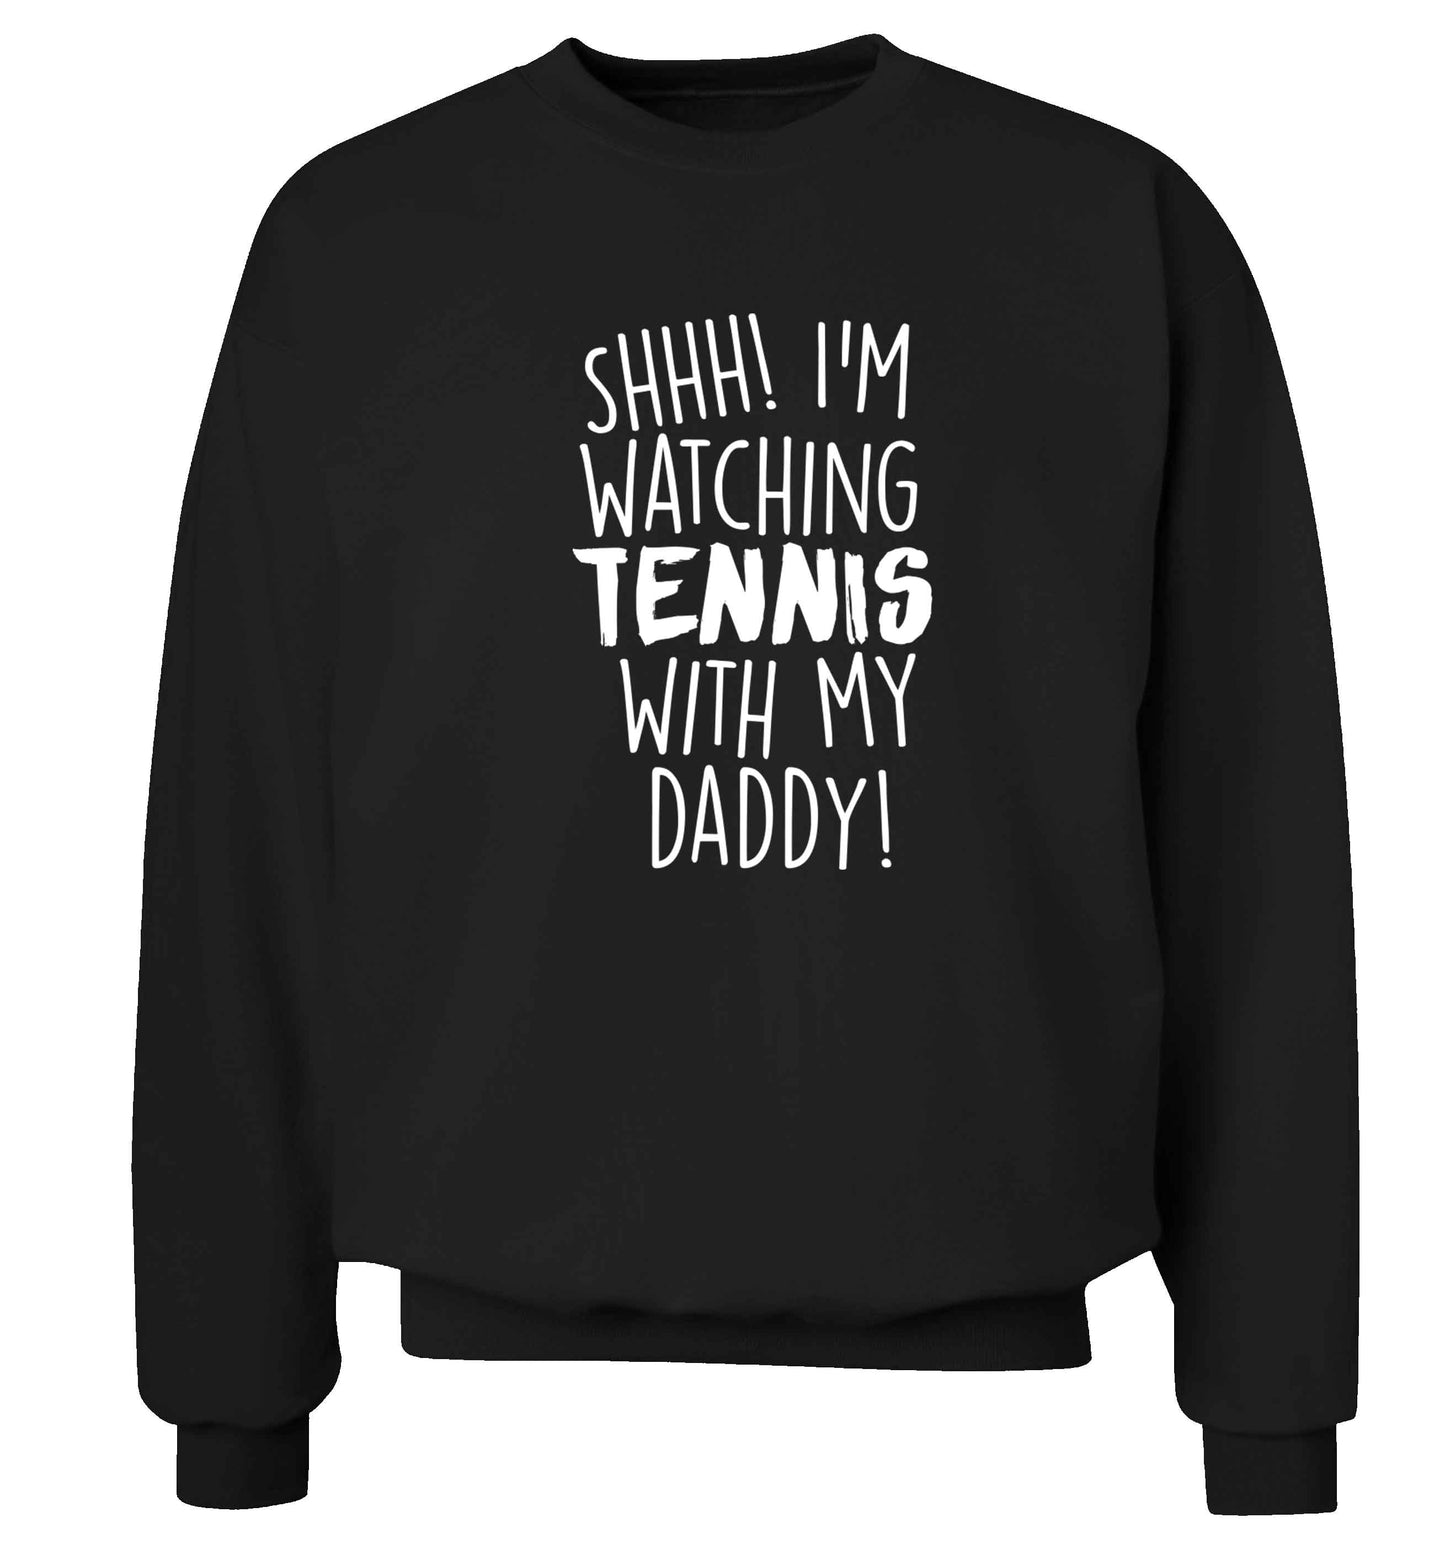 Shh! I'm watching tennis with my daddy! Adult's unisex black Sweater 2XL